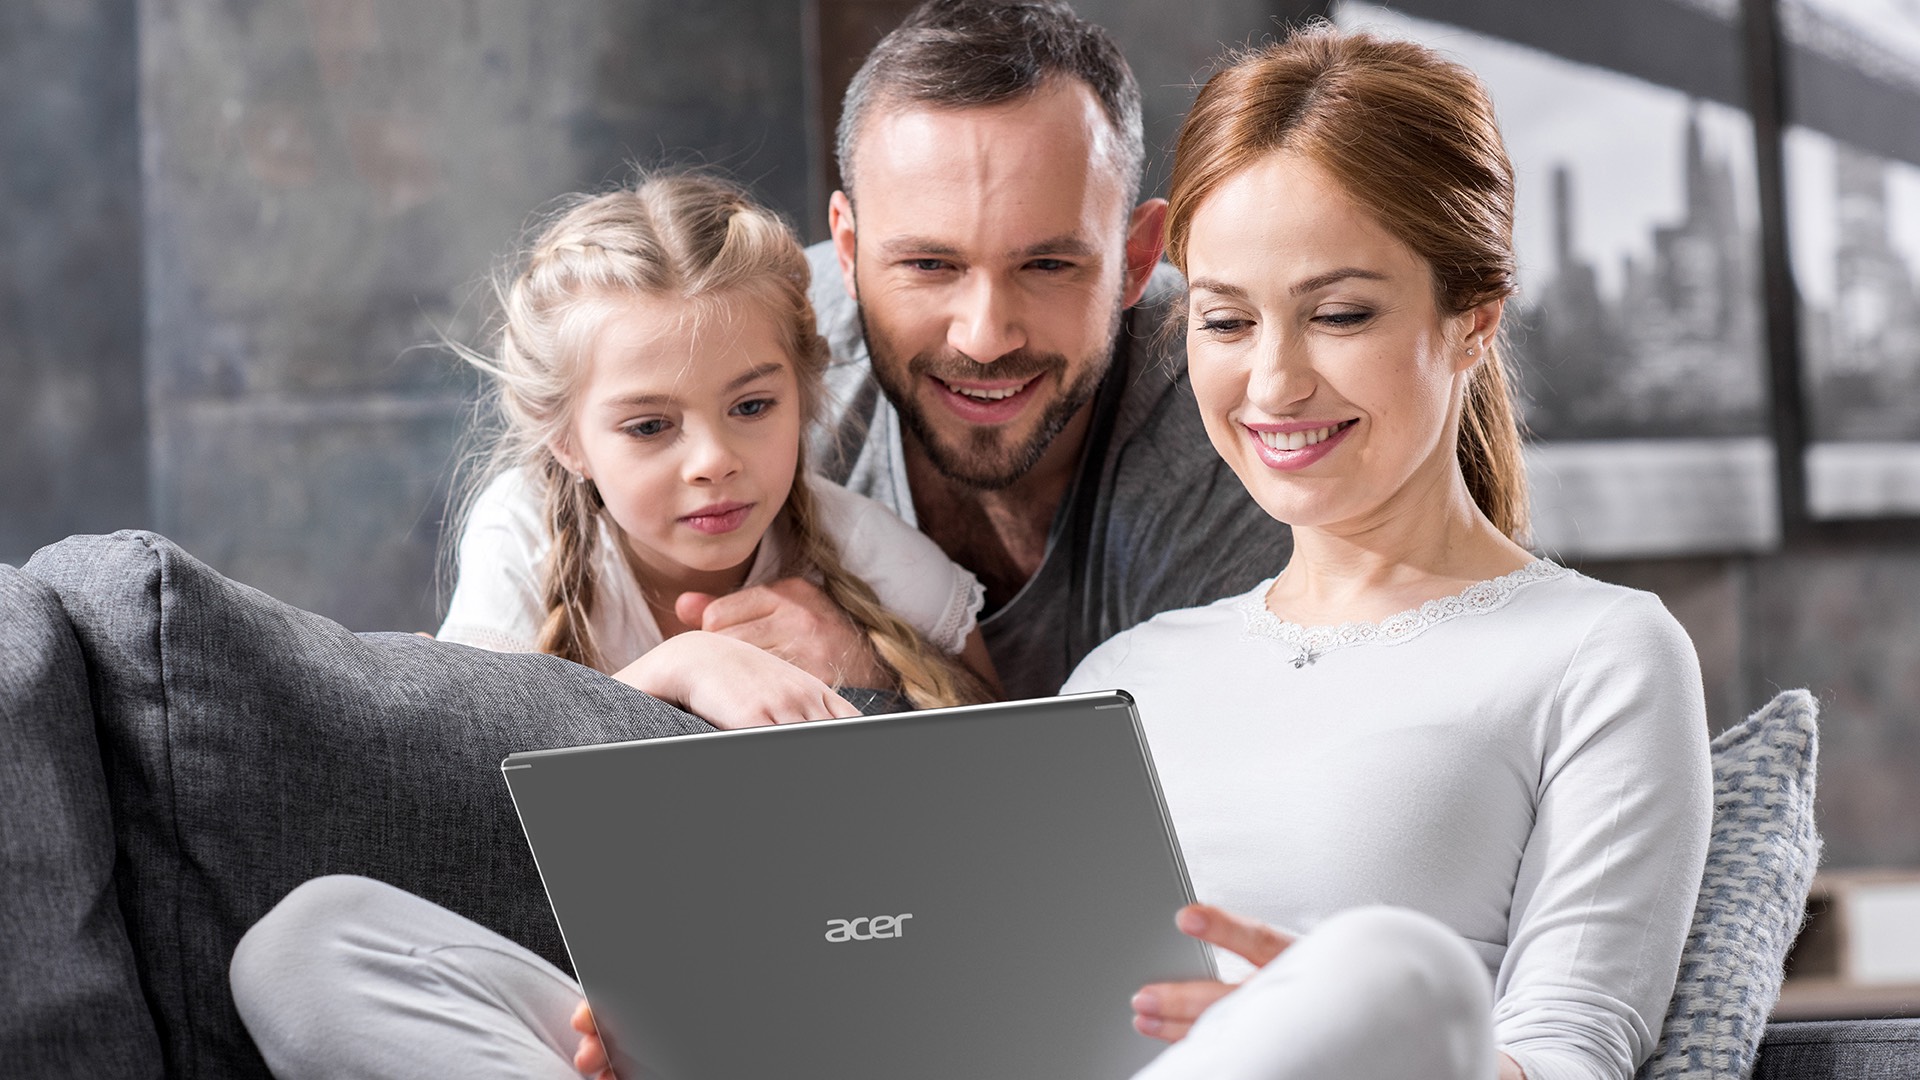 Family are watching Acer Aspire Notebook with smiles.